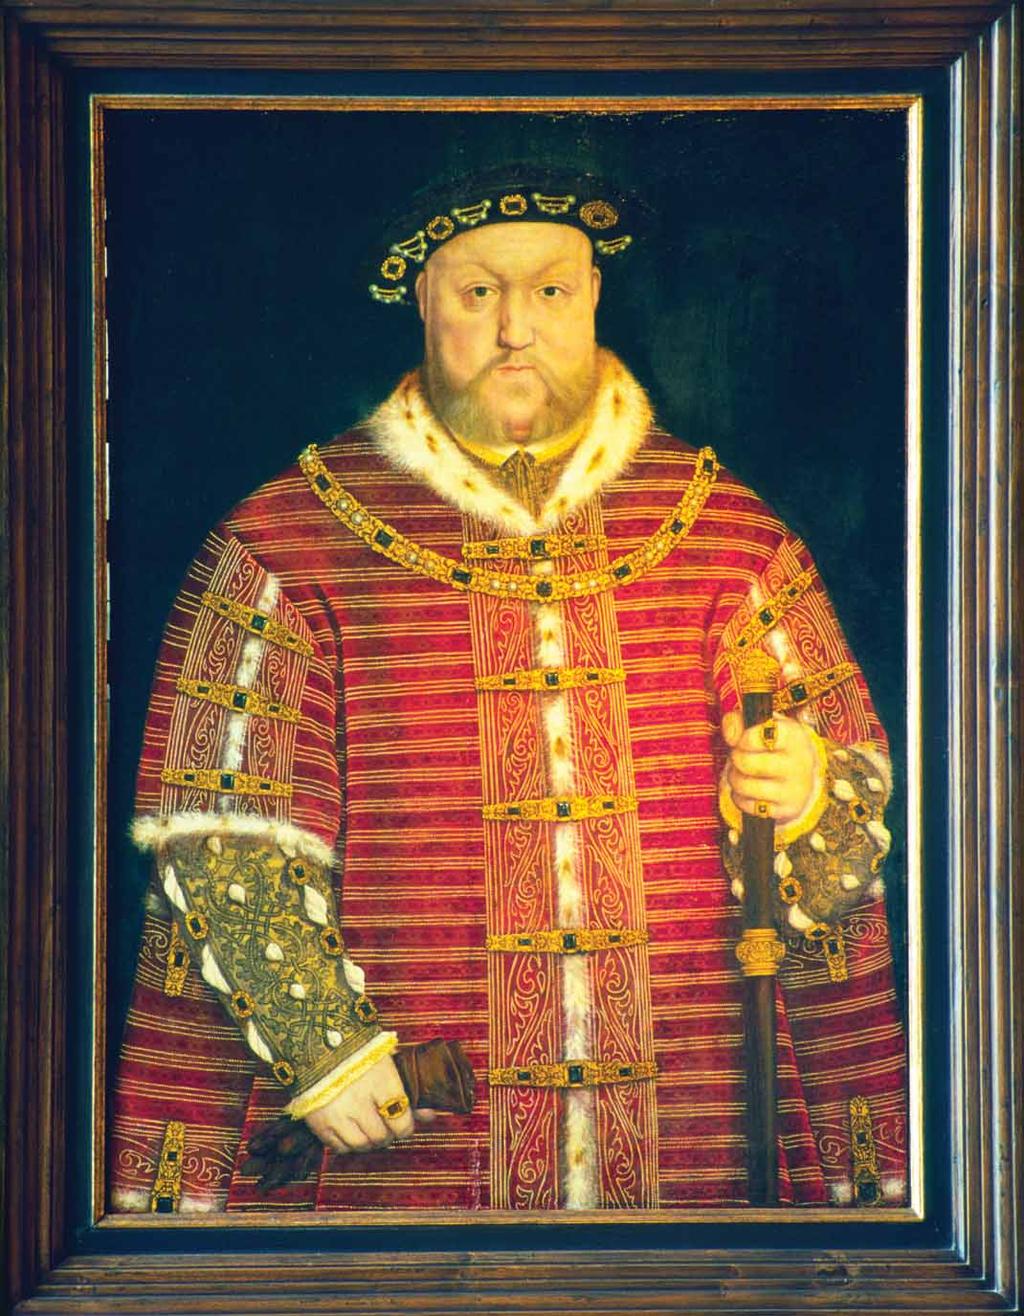 Henry VIII This portrait of the Tudor monarch who launched the English Reformation is by one of the leading portrait painters of